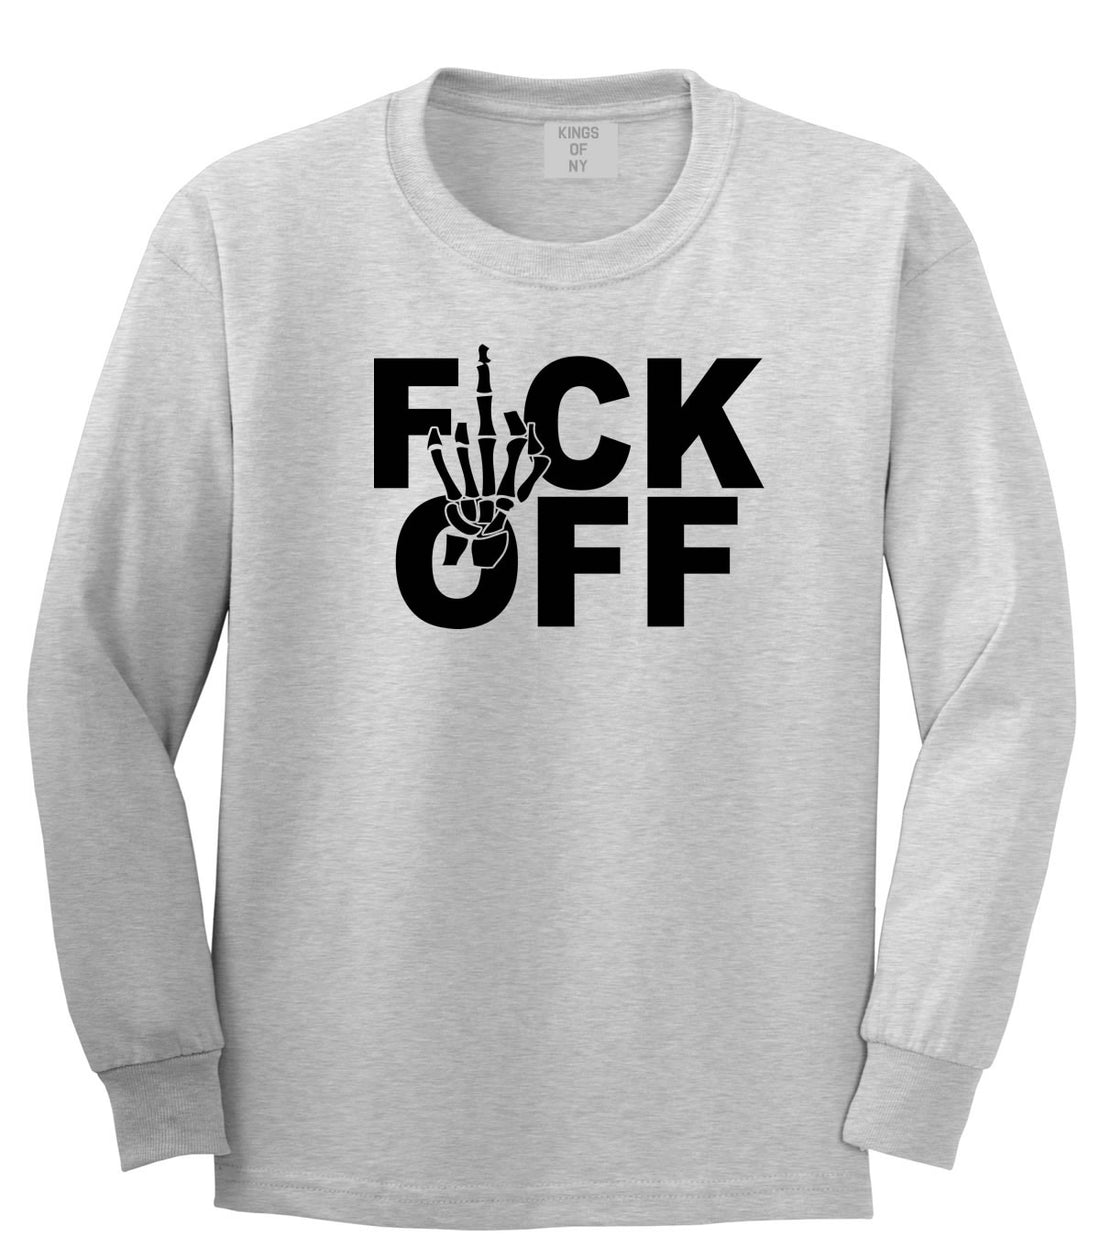 FCK OFF Skeleton Hand Long Sleeve T-Shirt in Grey by Kings Of NY